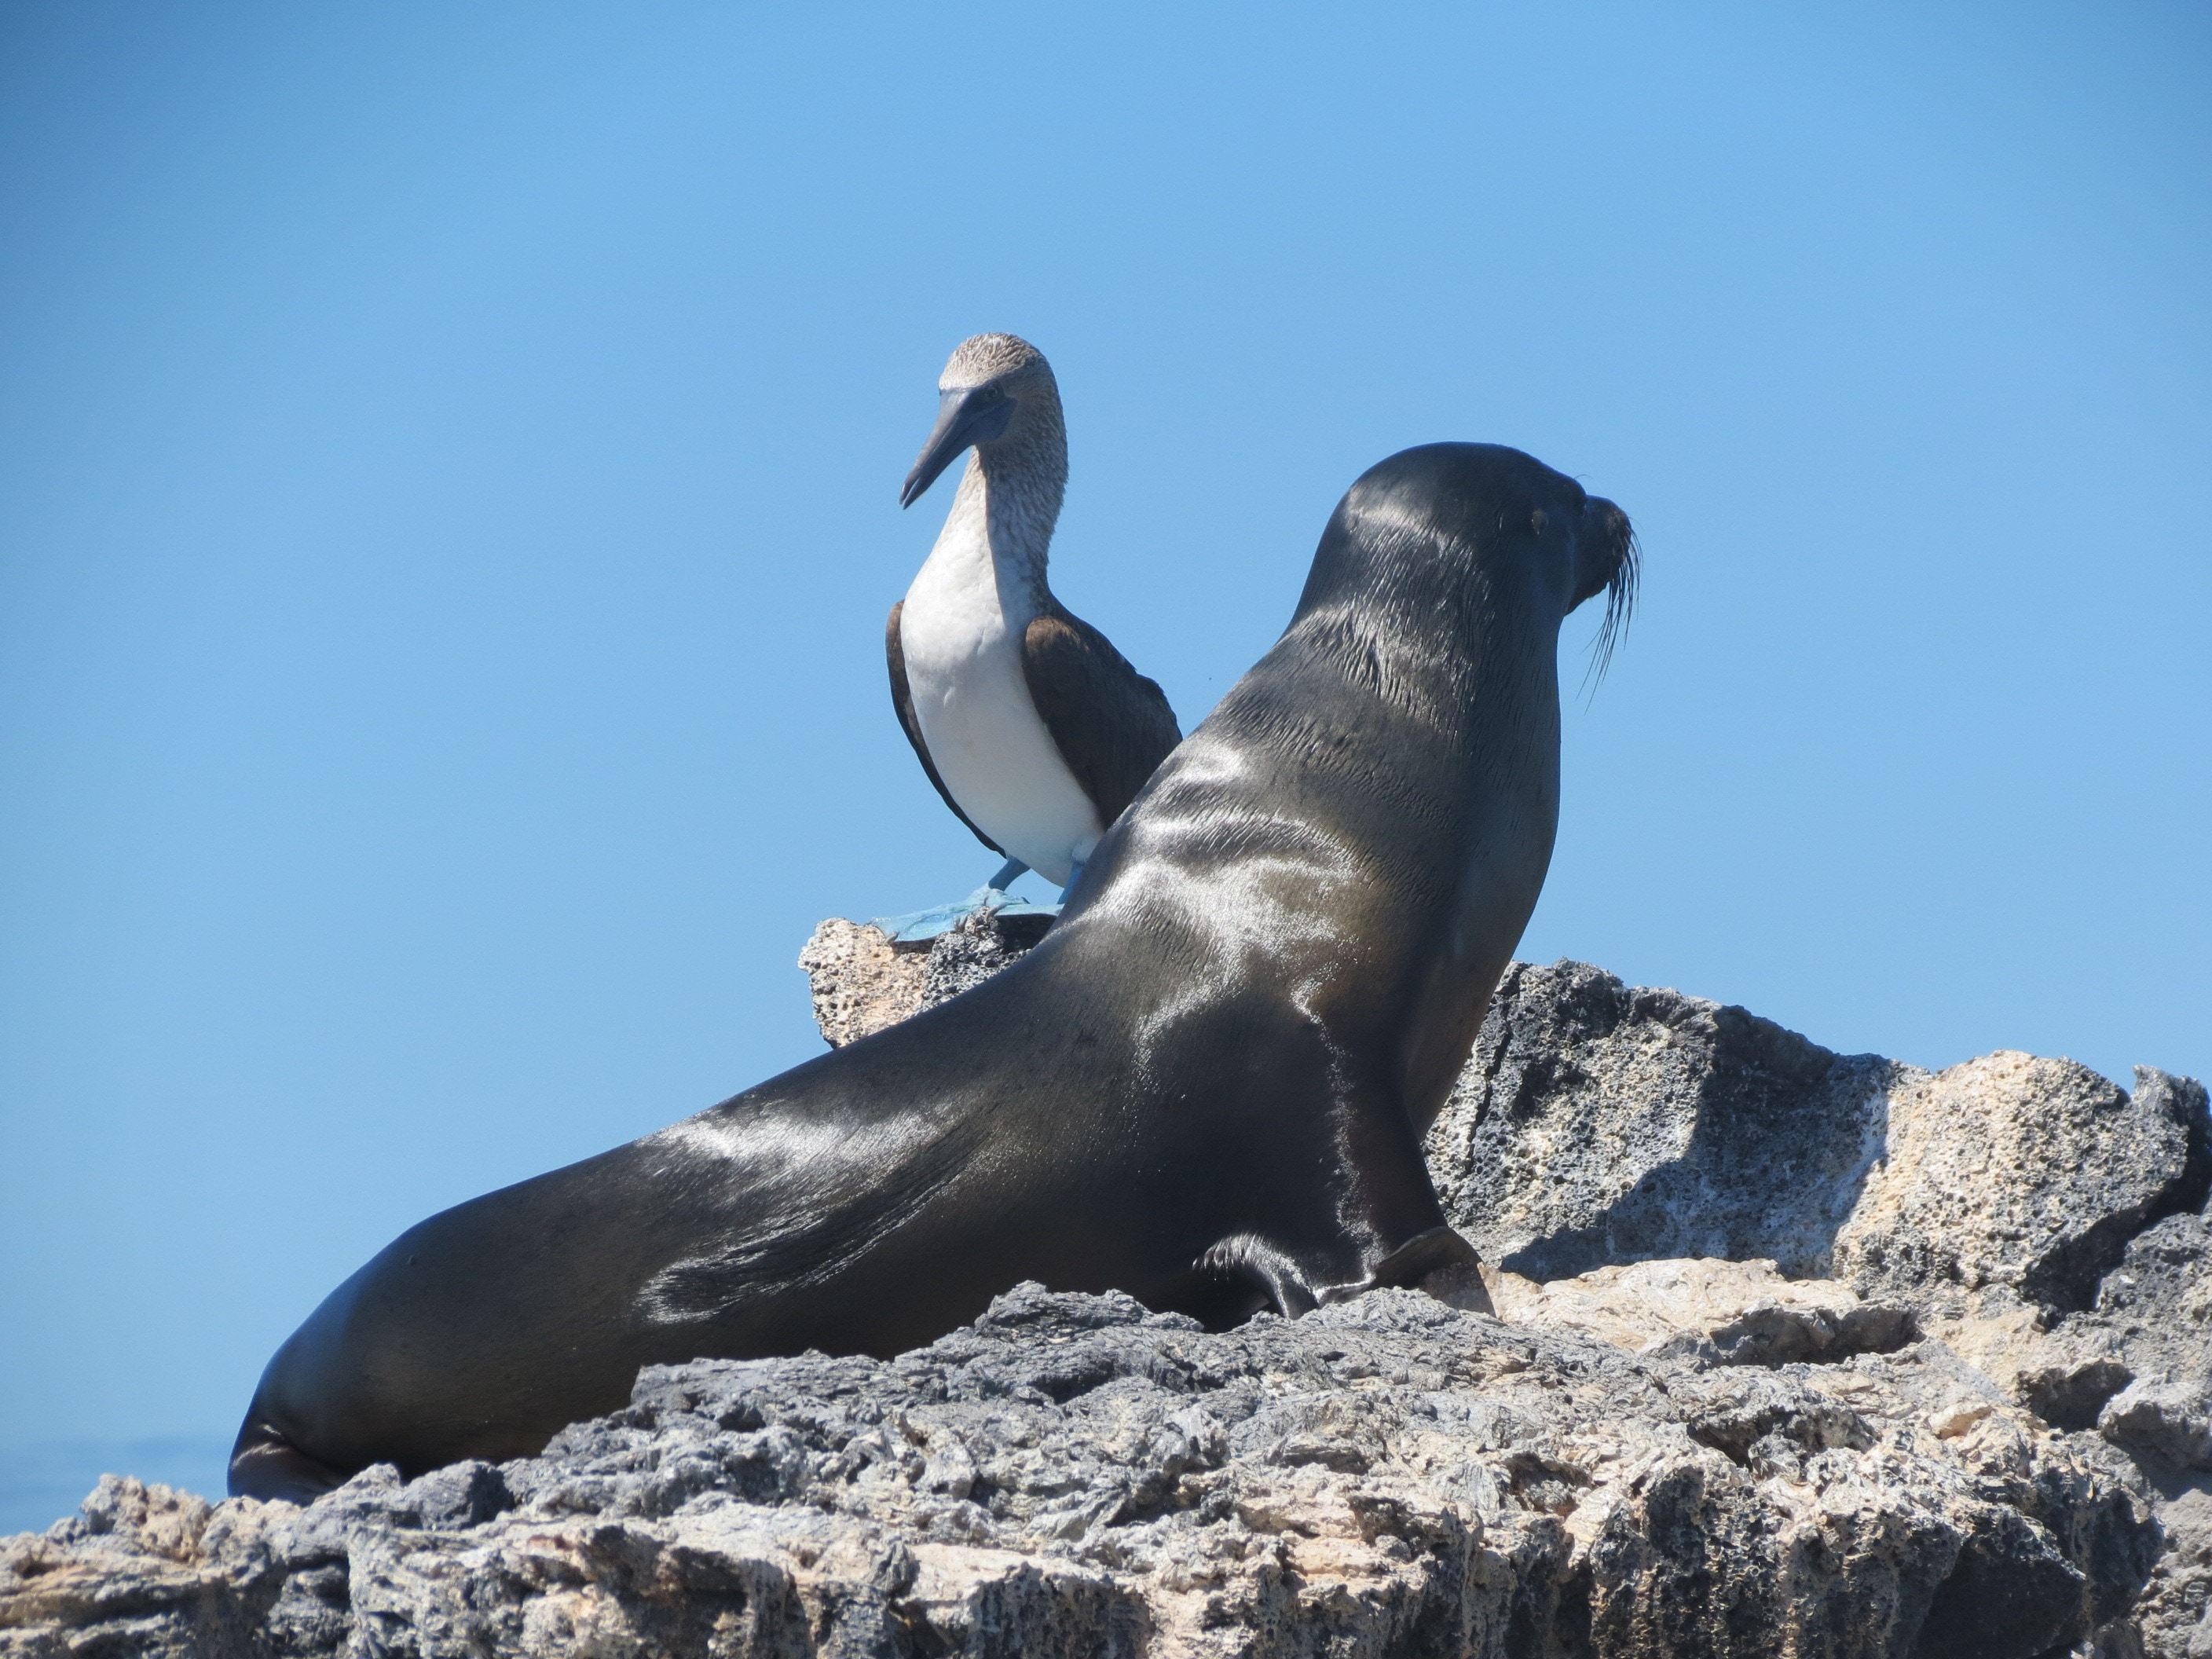 black sea lion and white and black bird